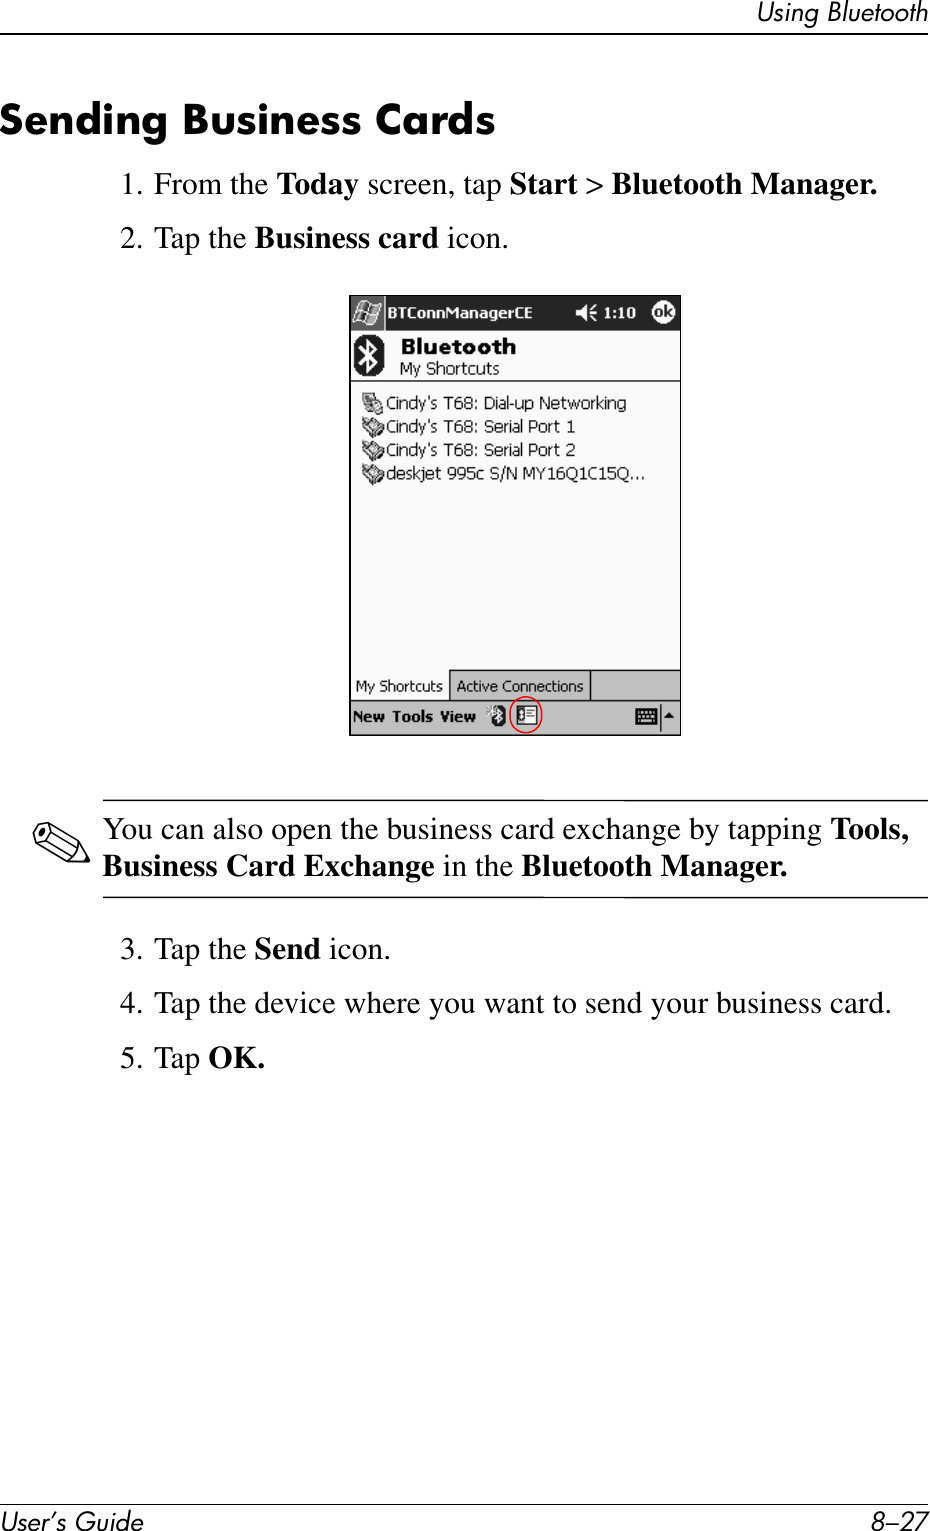 Using BluetoothUser’s Guide 8–27Sending Business Cards1. From the Today screen, tap Start &gt; Bluetooth Manager.2. Tap the Business card icon.✎You can also open the business card exchange by tapping Tools, Business Card Exchange in the Bluetooth Manager.3. Tap the Send icon.4. Tap the device where you want to send your business card.5. Tap OK.